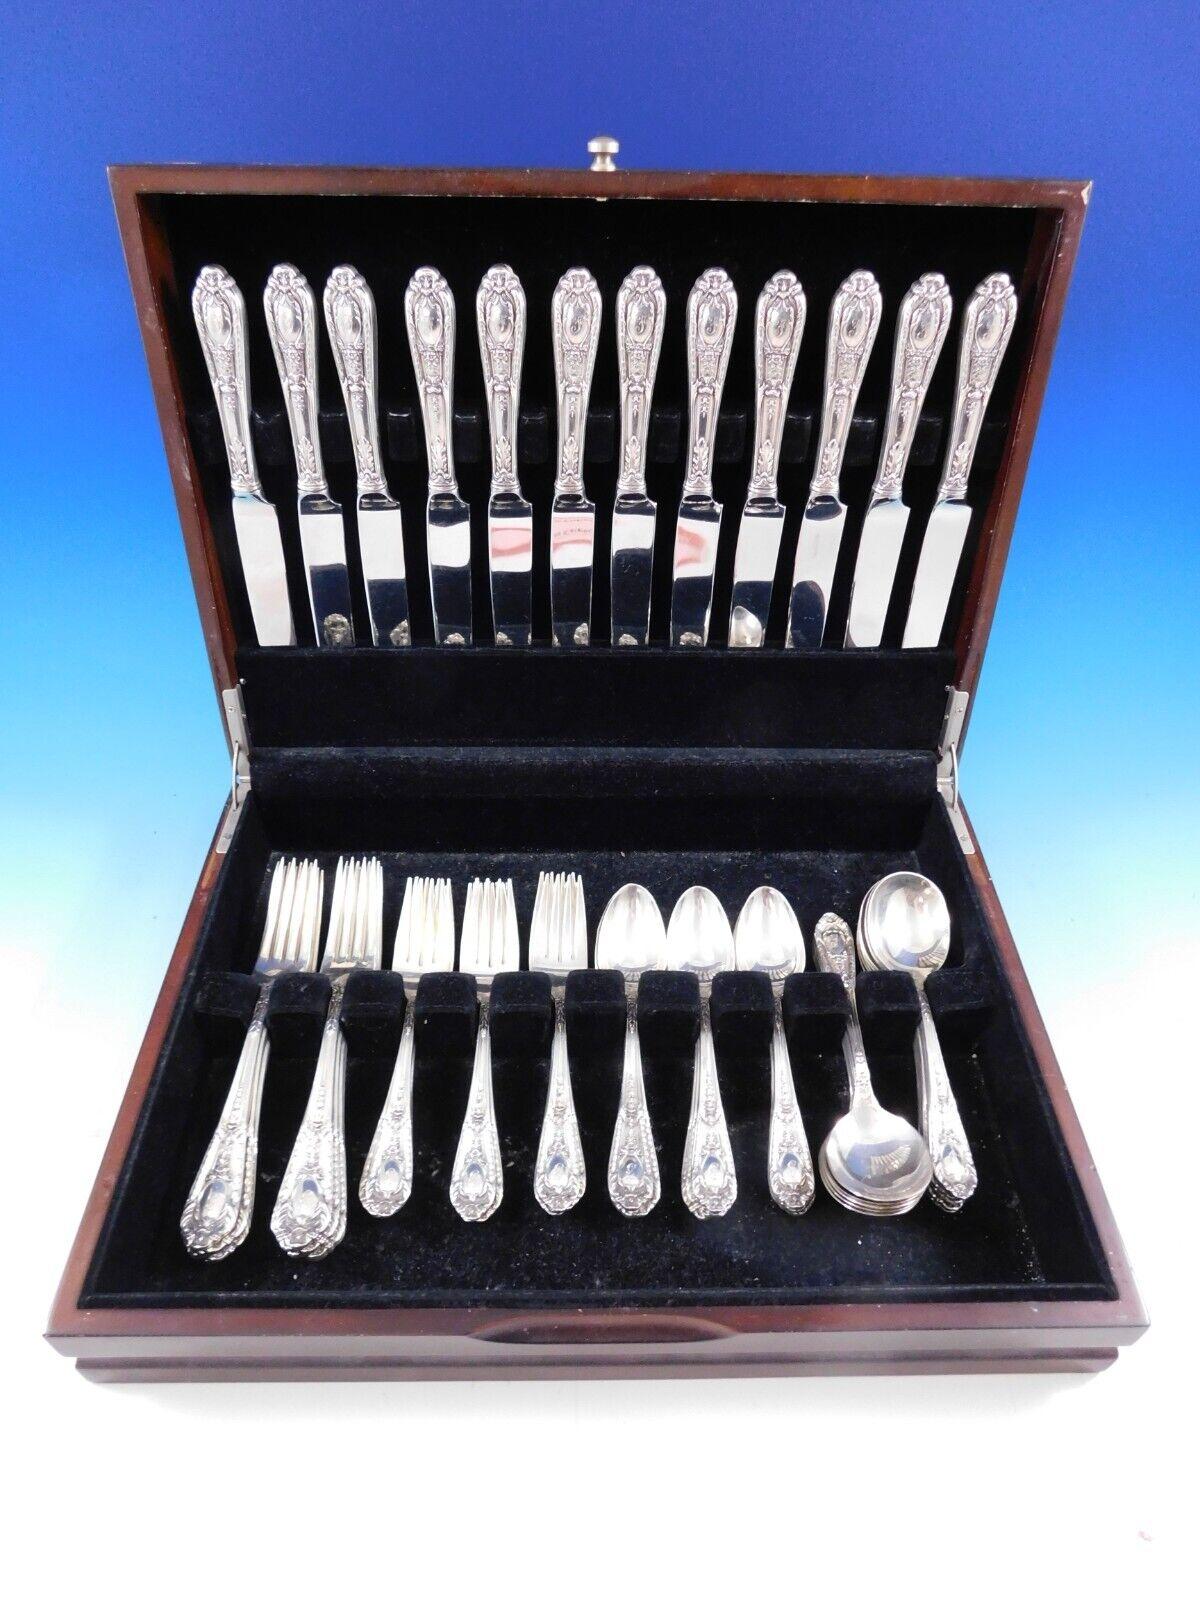 FONTAINE BY INTERNATIONAL sterling silver Flatware set - 60 Pieces. This set includes:

12 KNIVES, 9